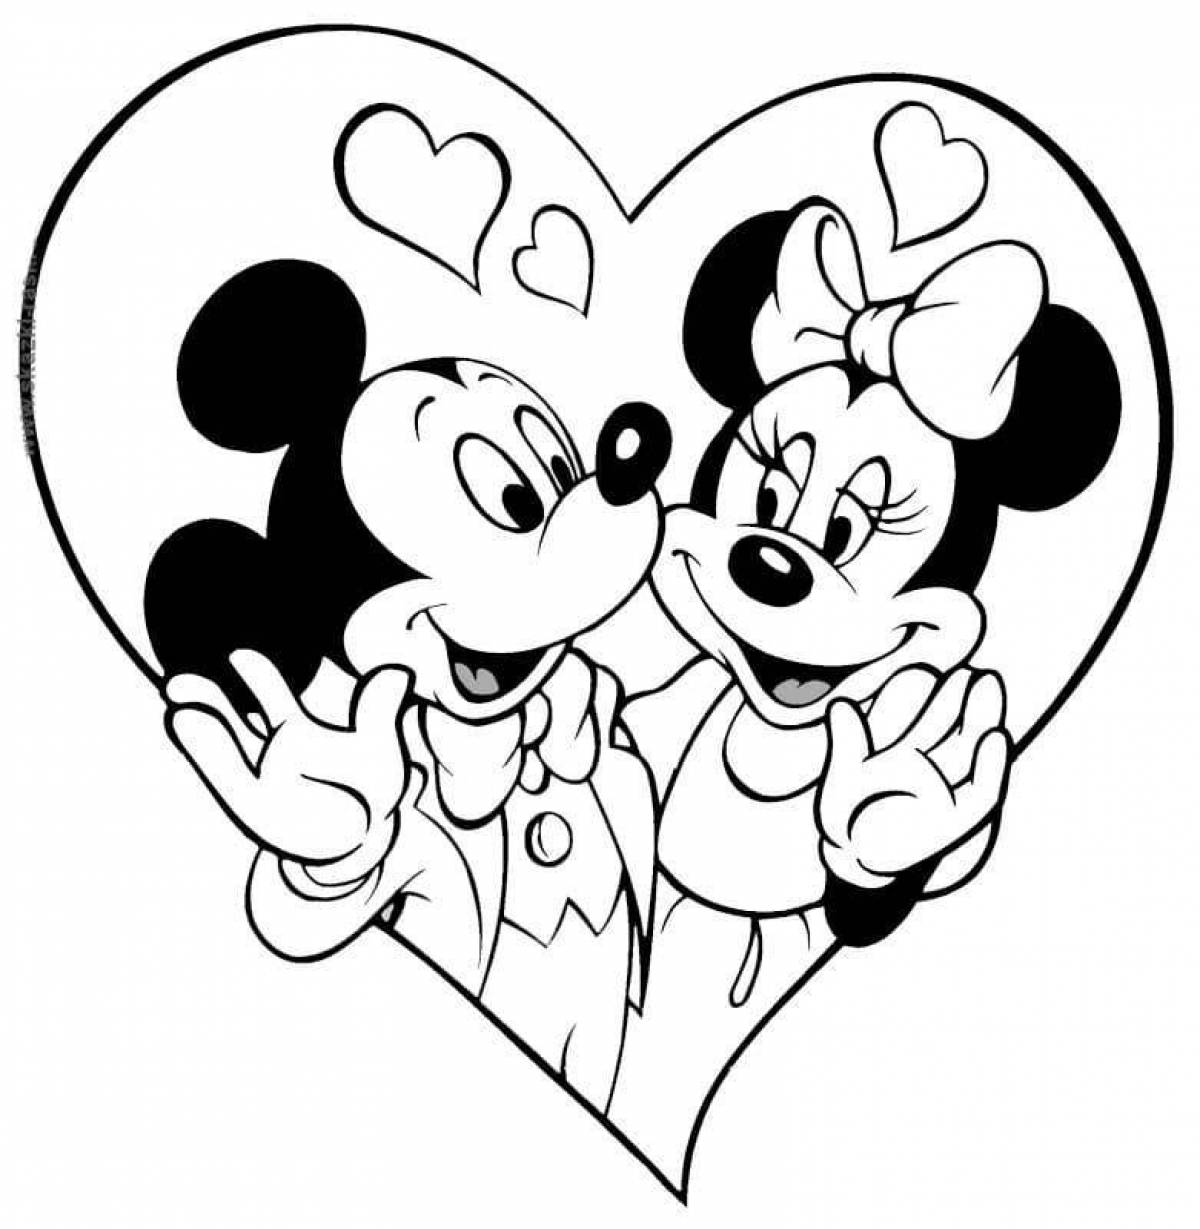 Mickey Mouse and Minnie Mouse #7